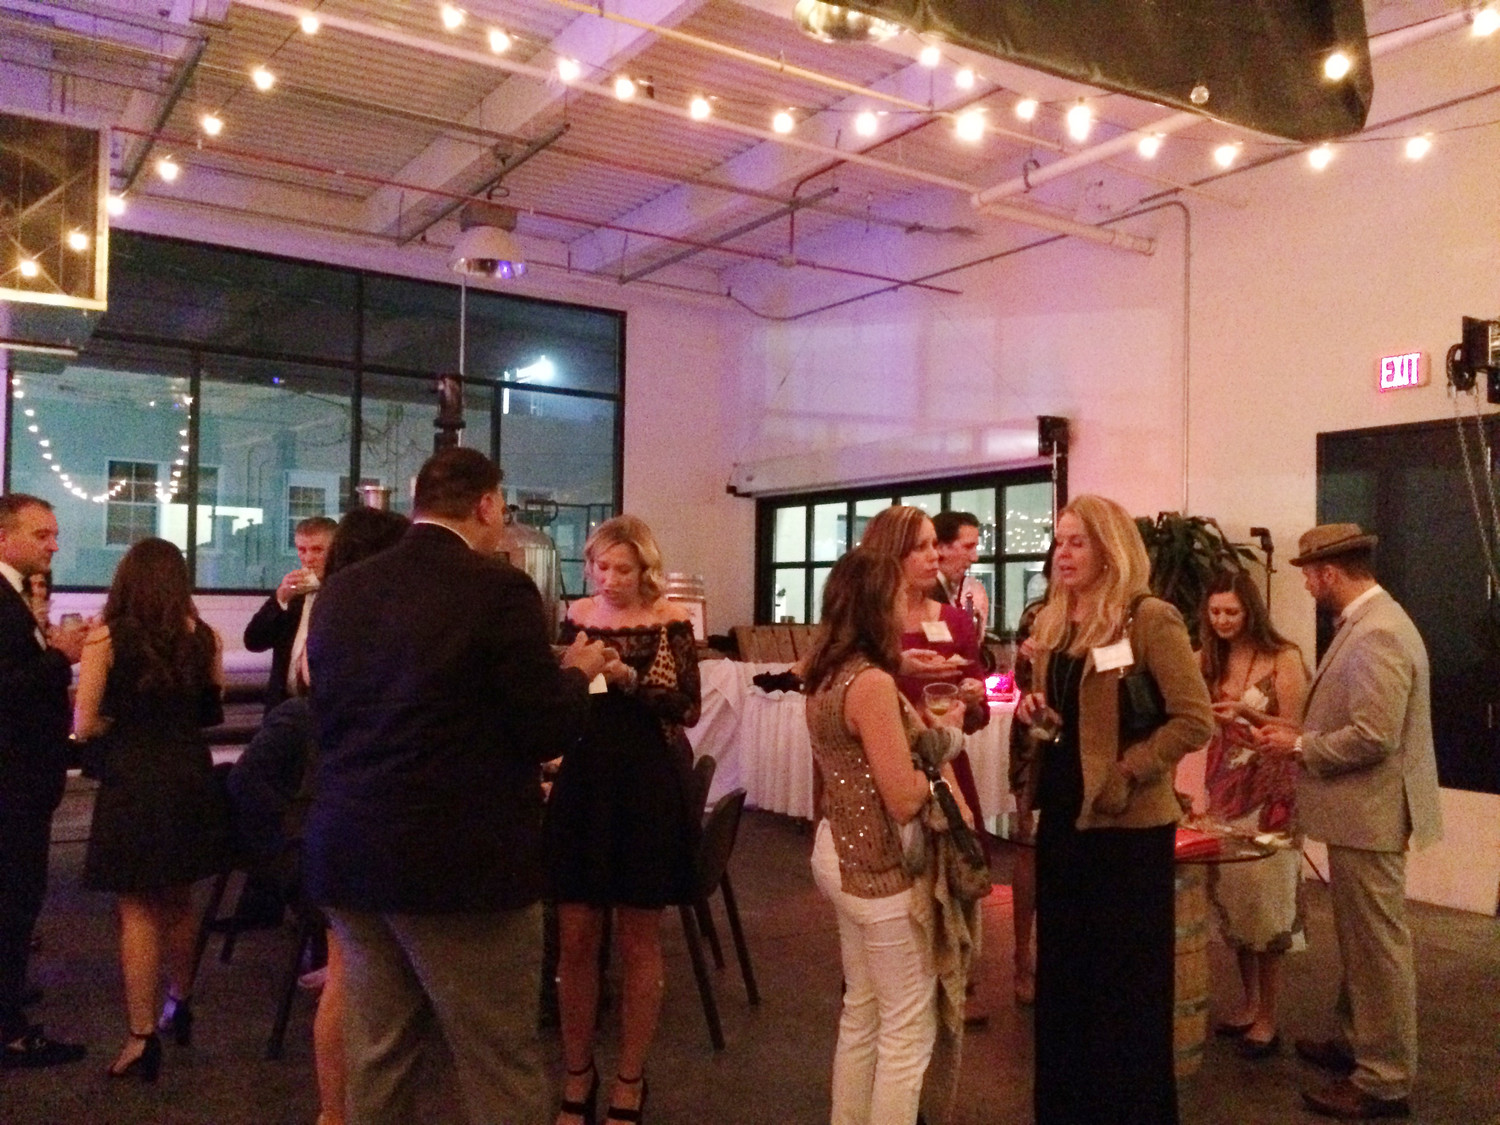 Guests enjoy the inaugural Bowtie Ball event at Manifest Distilling in Jacksonville.